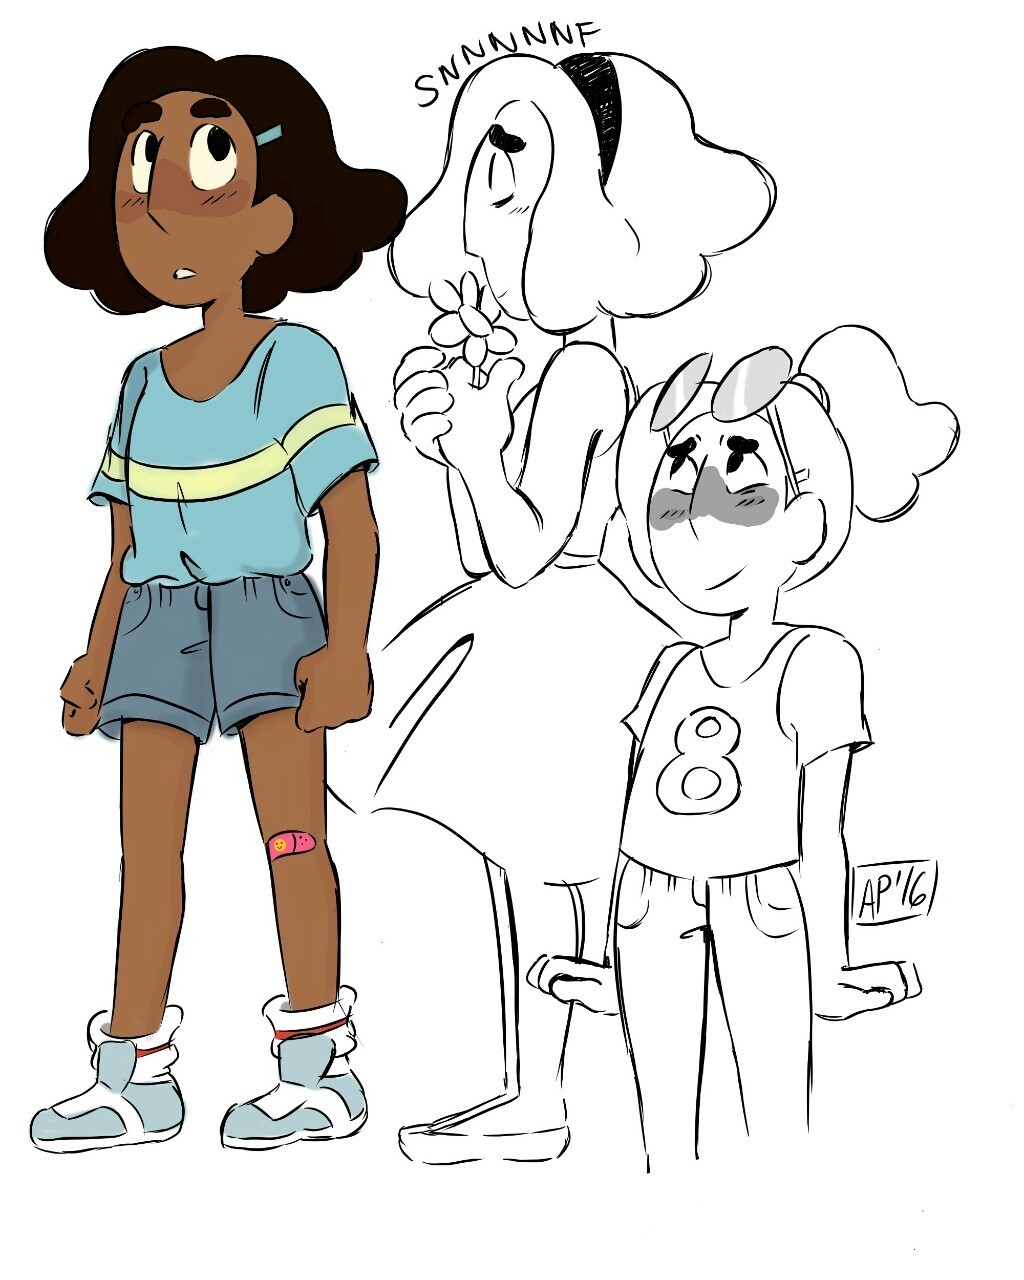 Here comes a thought… What’s Stevonnie gonna look like with short hair? Still cool! :)